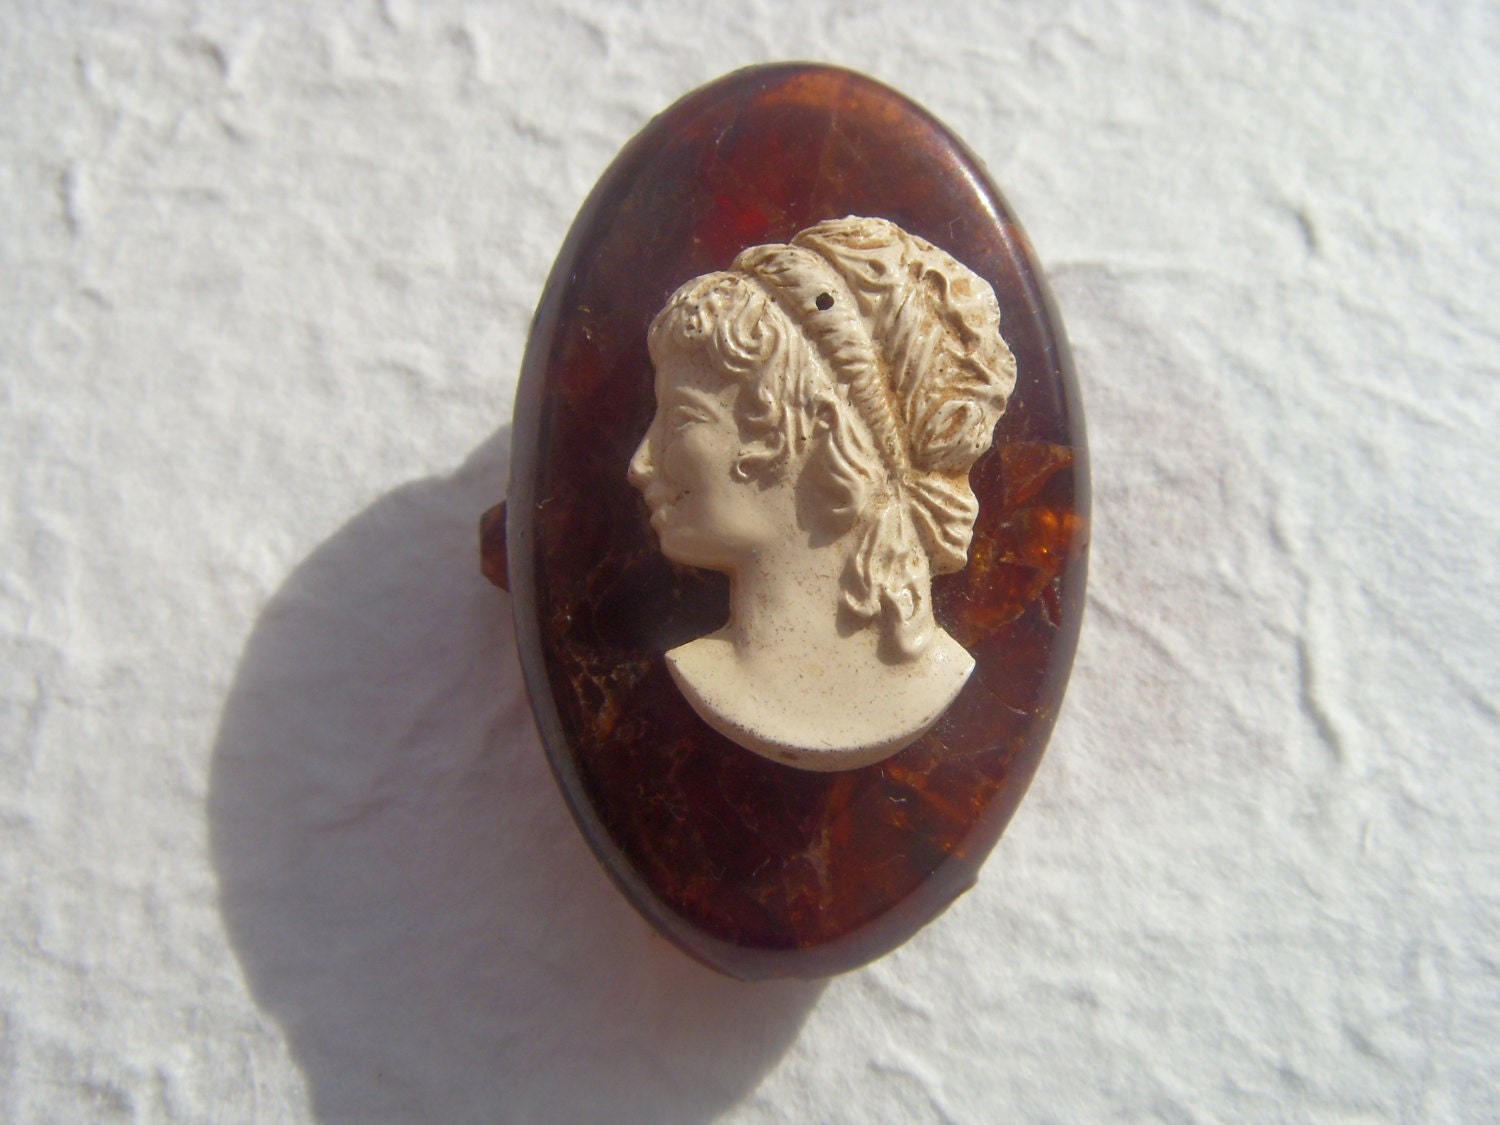 SALE 25% OFF Vintage Soviet Cameo Amber Brooch Made in USSR in 1970s - Astra9